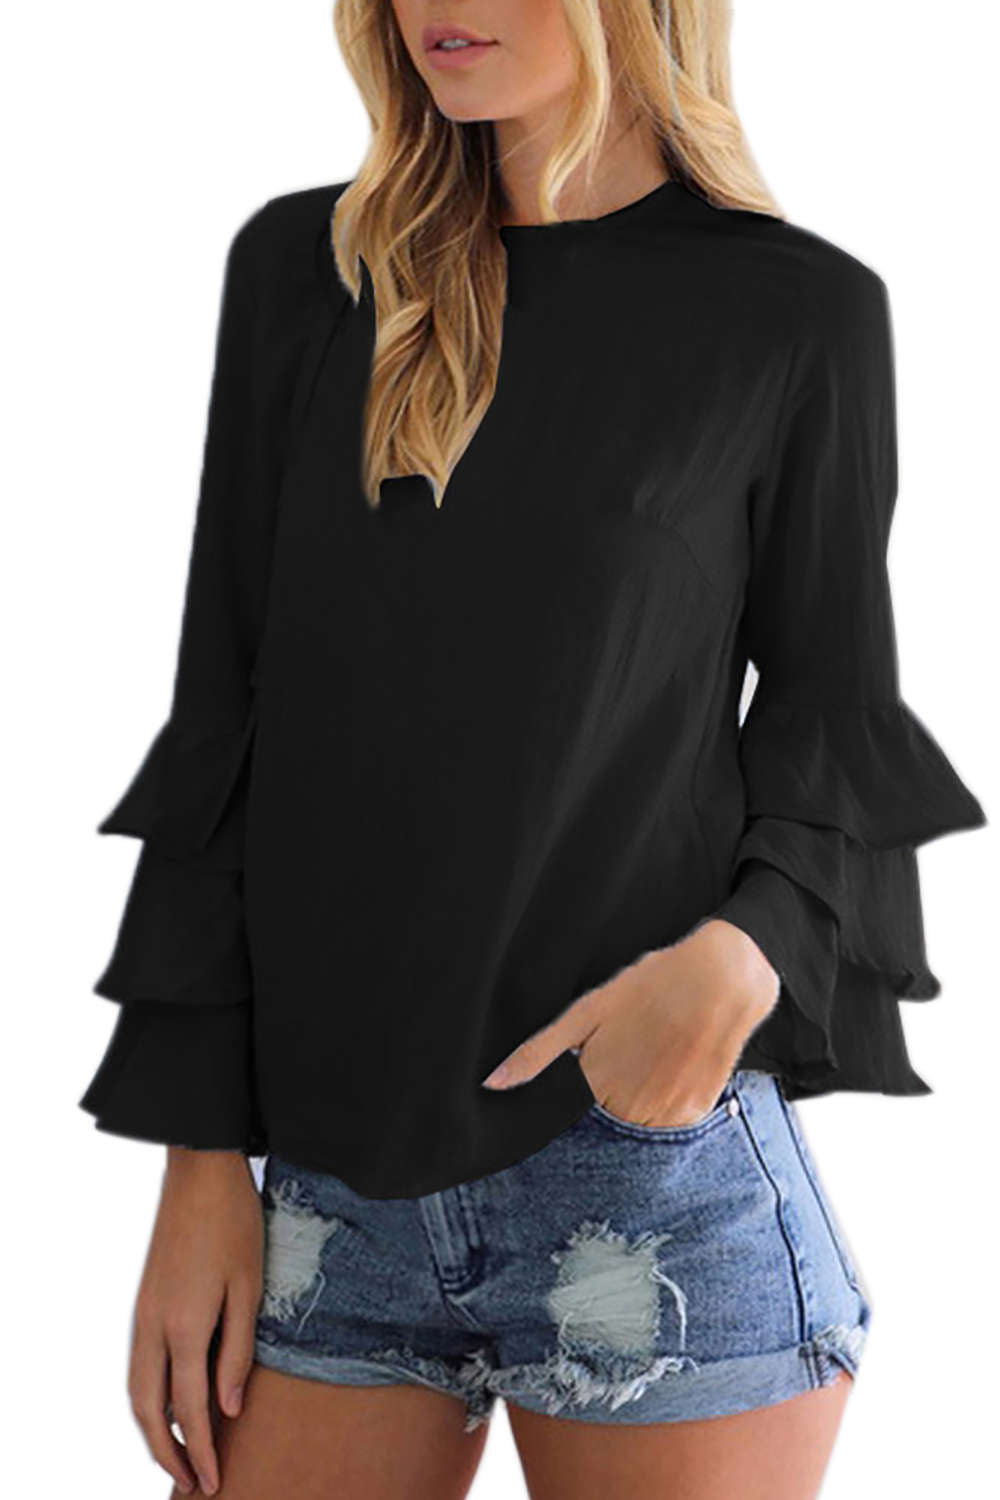 Iyasson Round Neck Bell-Sleeve Blouse Top